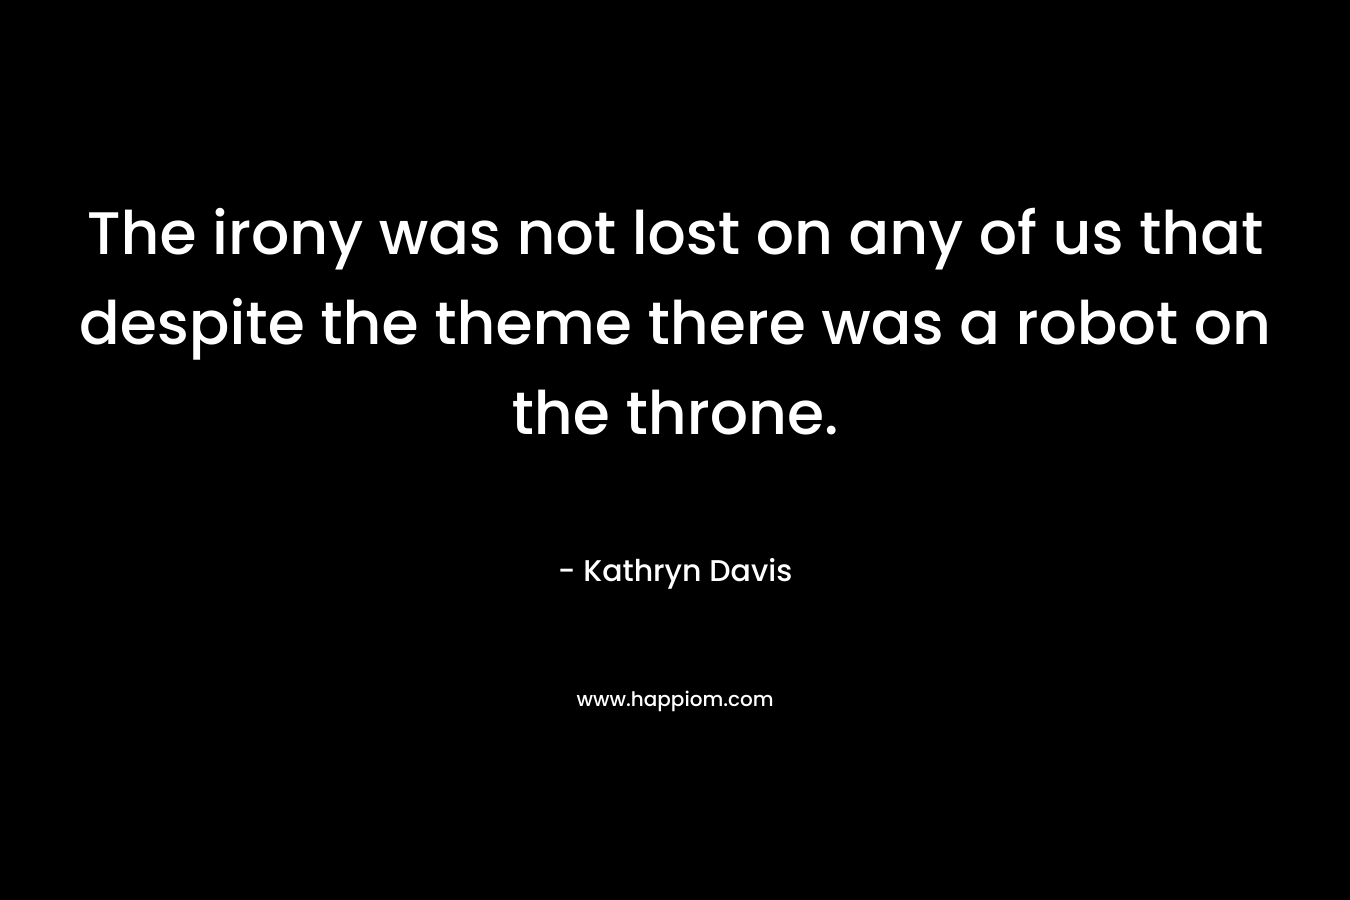 The irony was not lost on any of us that despite the theme there was a robot on the throne. – Kathryn Davis